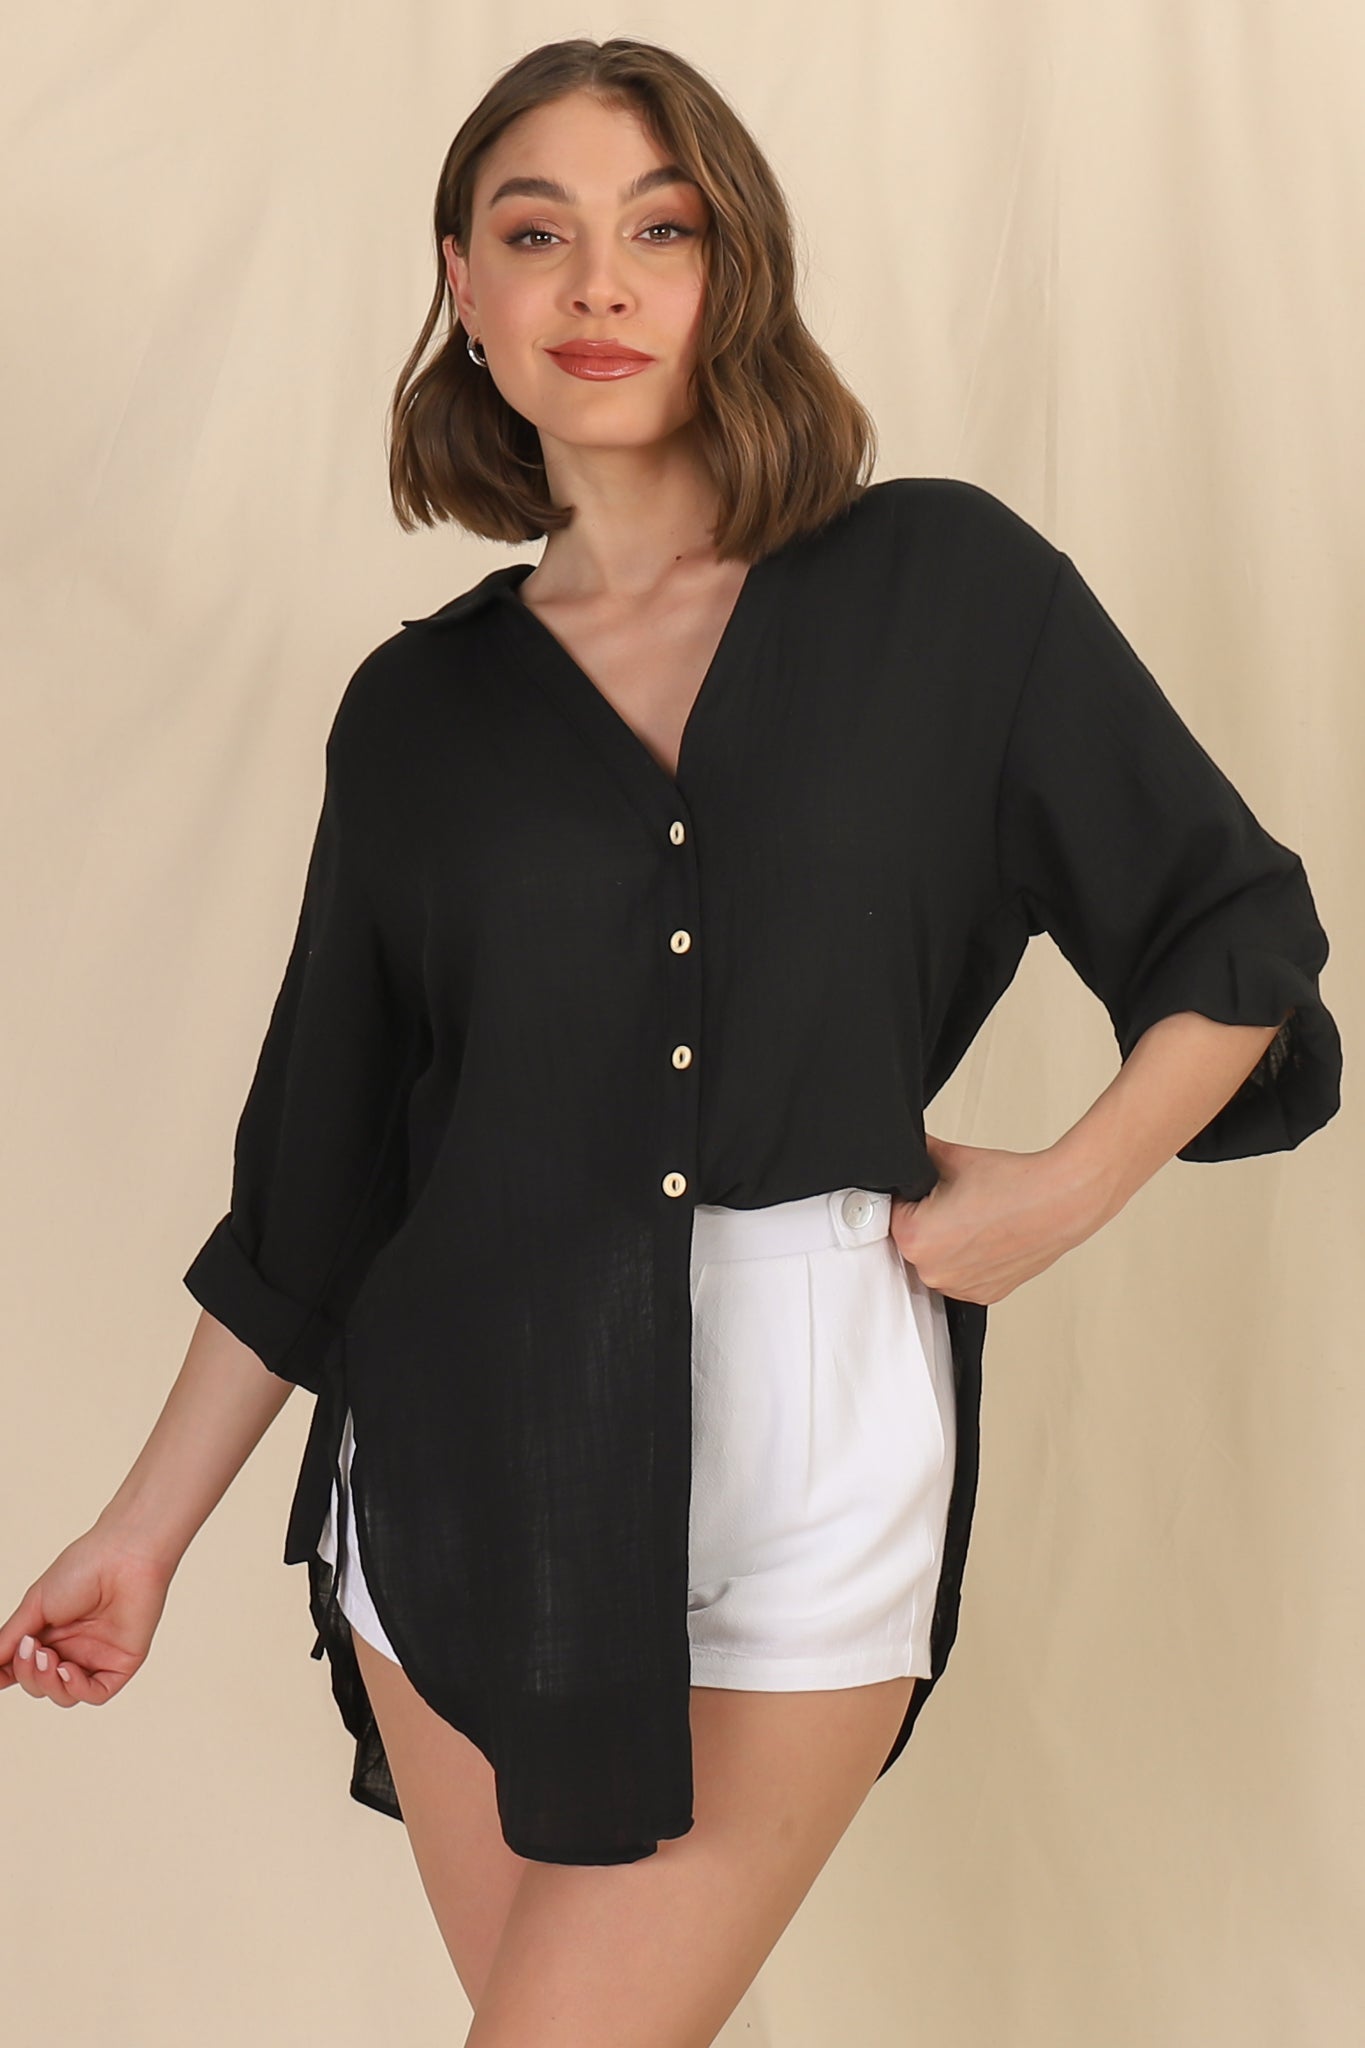 Beachly Shirt - Folded Collar Button Down Relaxed Shirt In Black